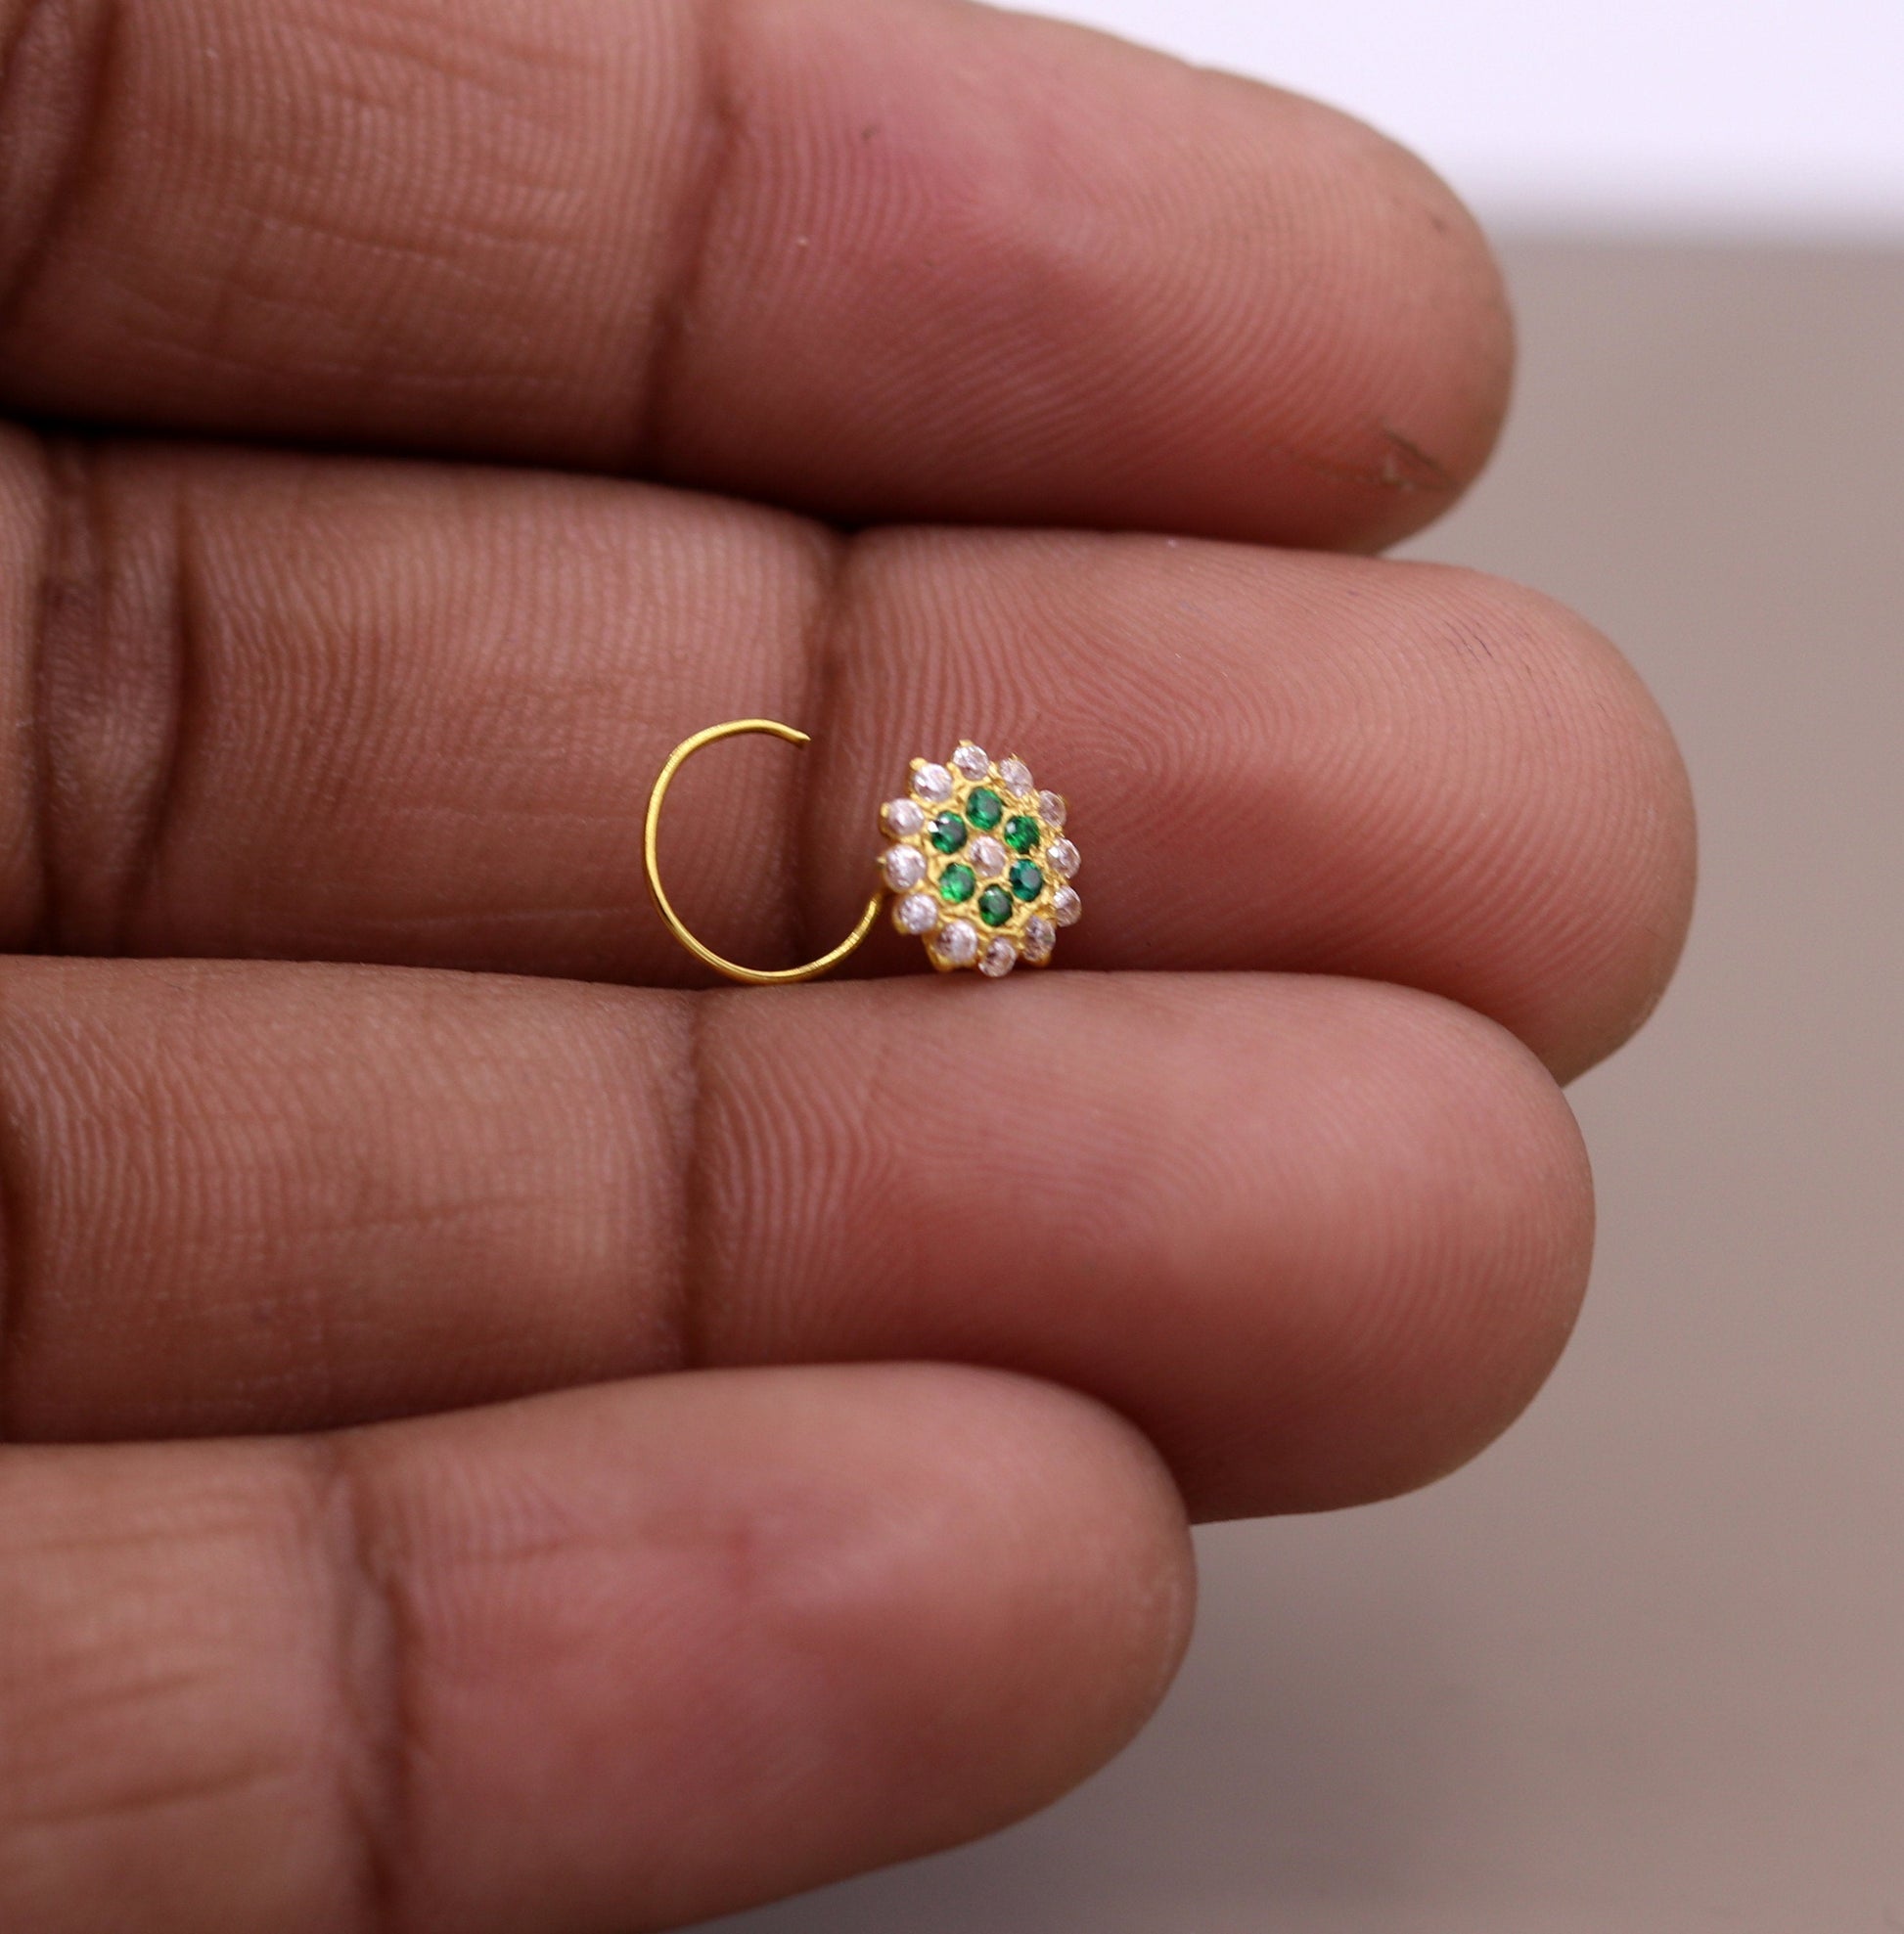 18kt yellow gold handmade fabulous green color stone cubic zircon nose stud,excellent women girls daily use jewelry from Rajasthan gnp16 - TRIBAL ORNAMENTS